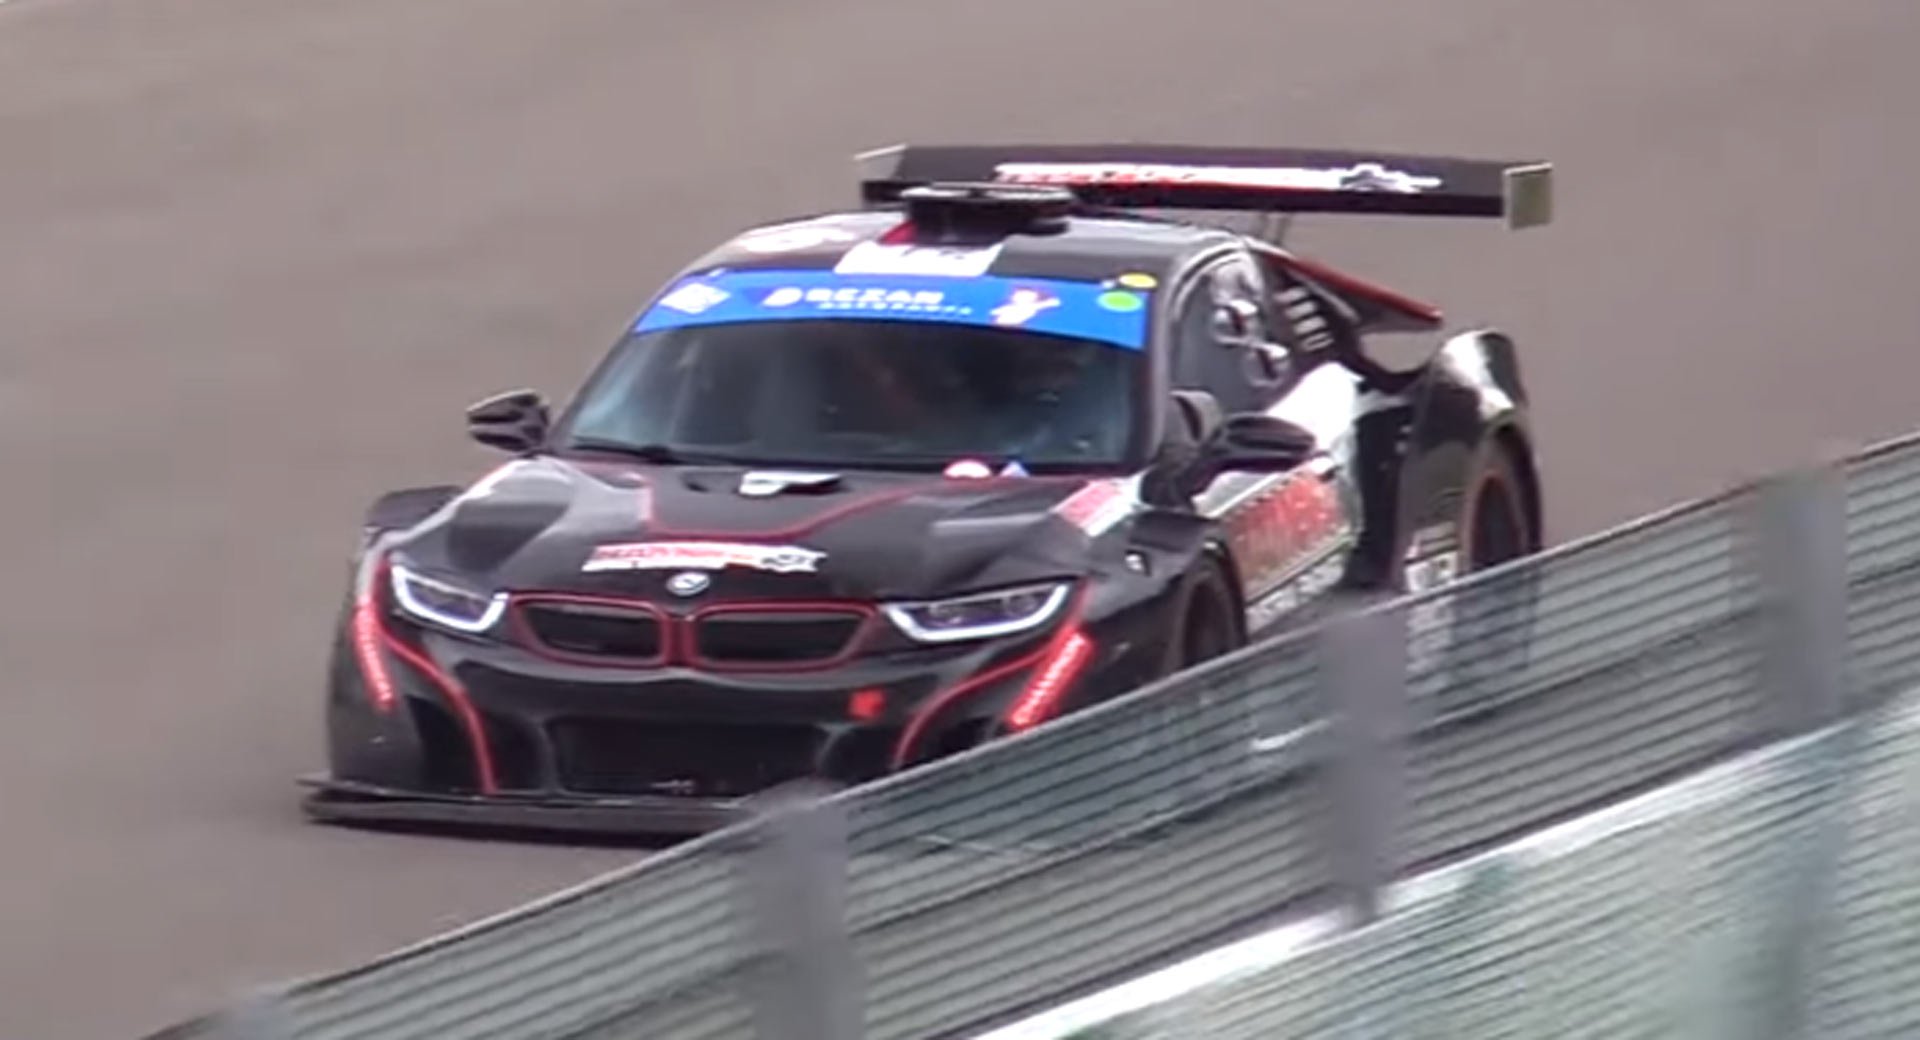 If Only BMW Made A Street-Legal, V8-Powered i8 Like This Racer